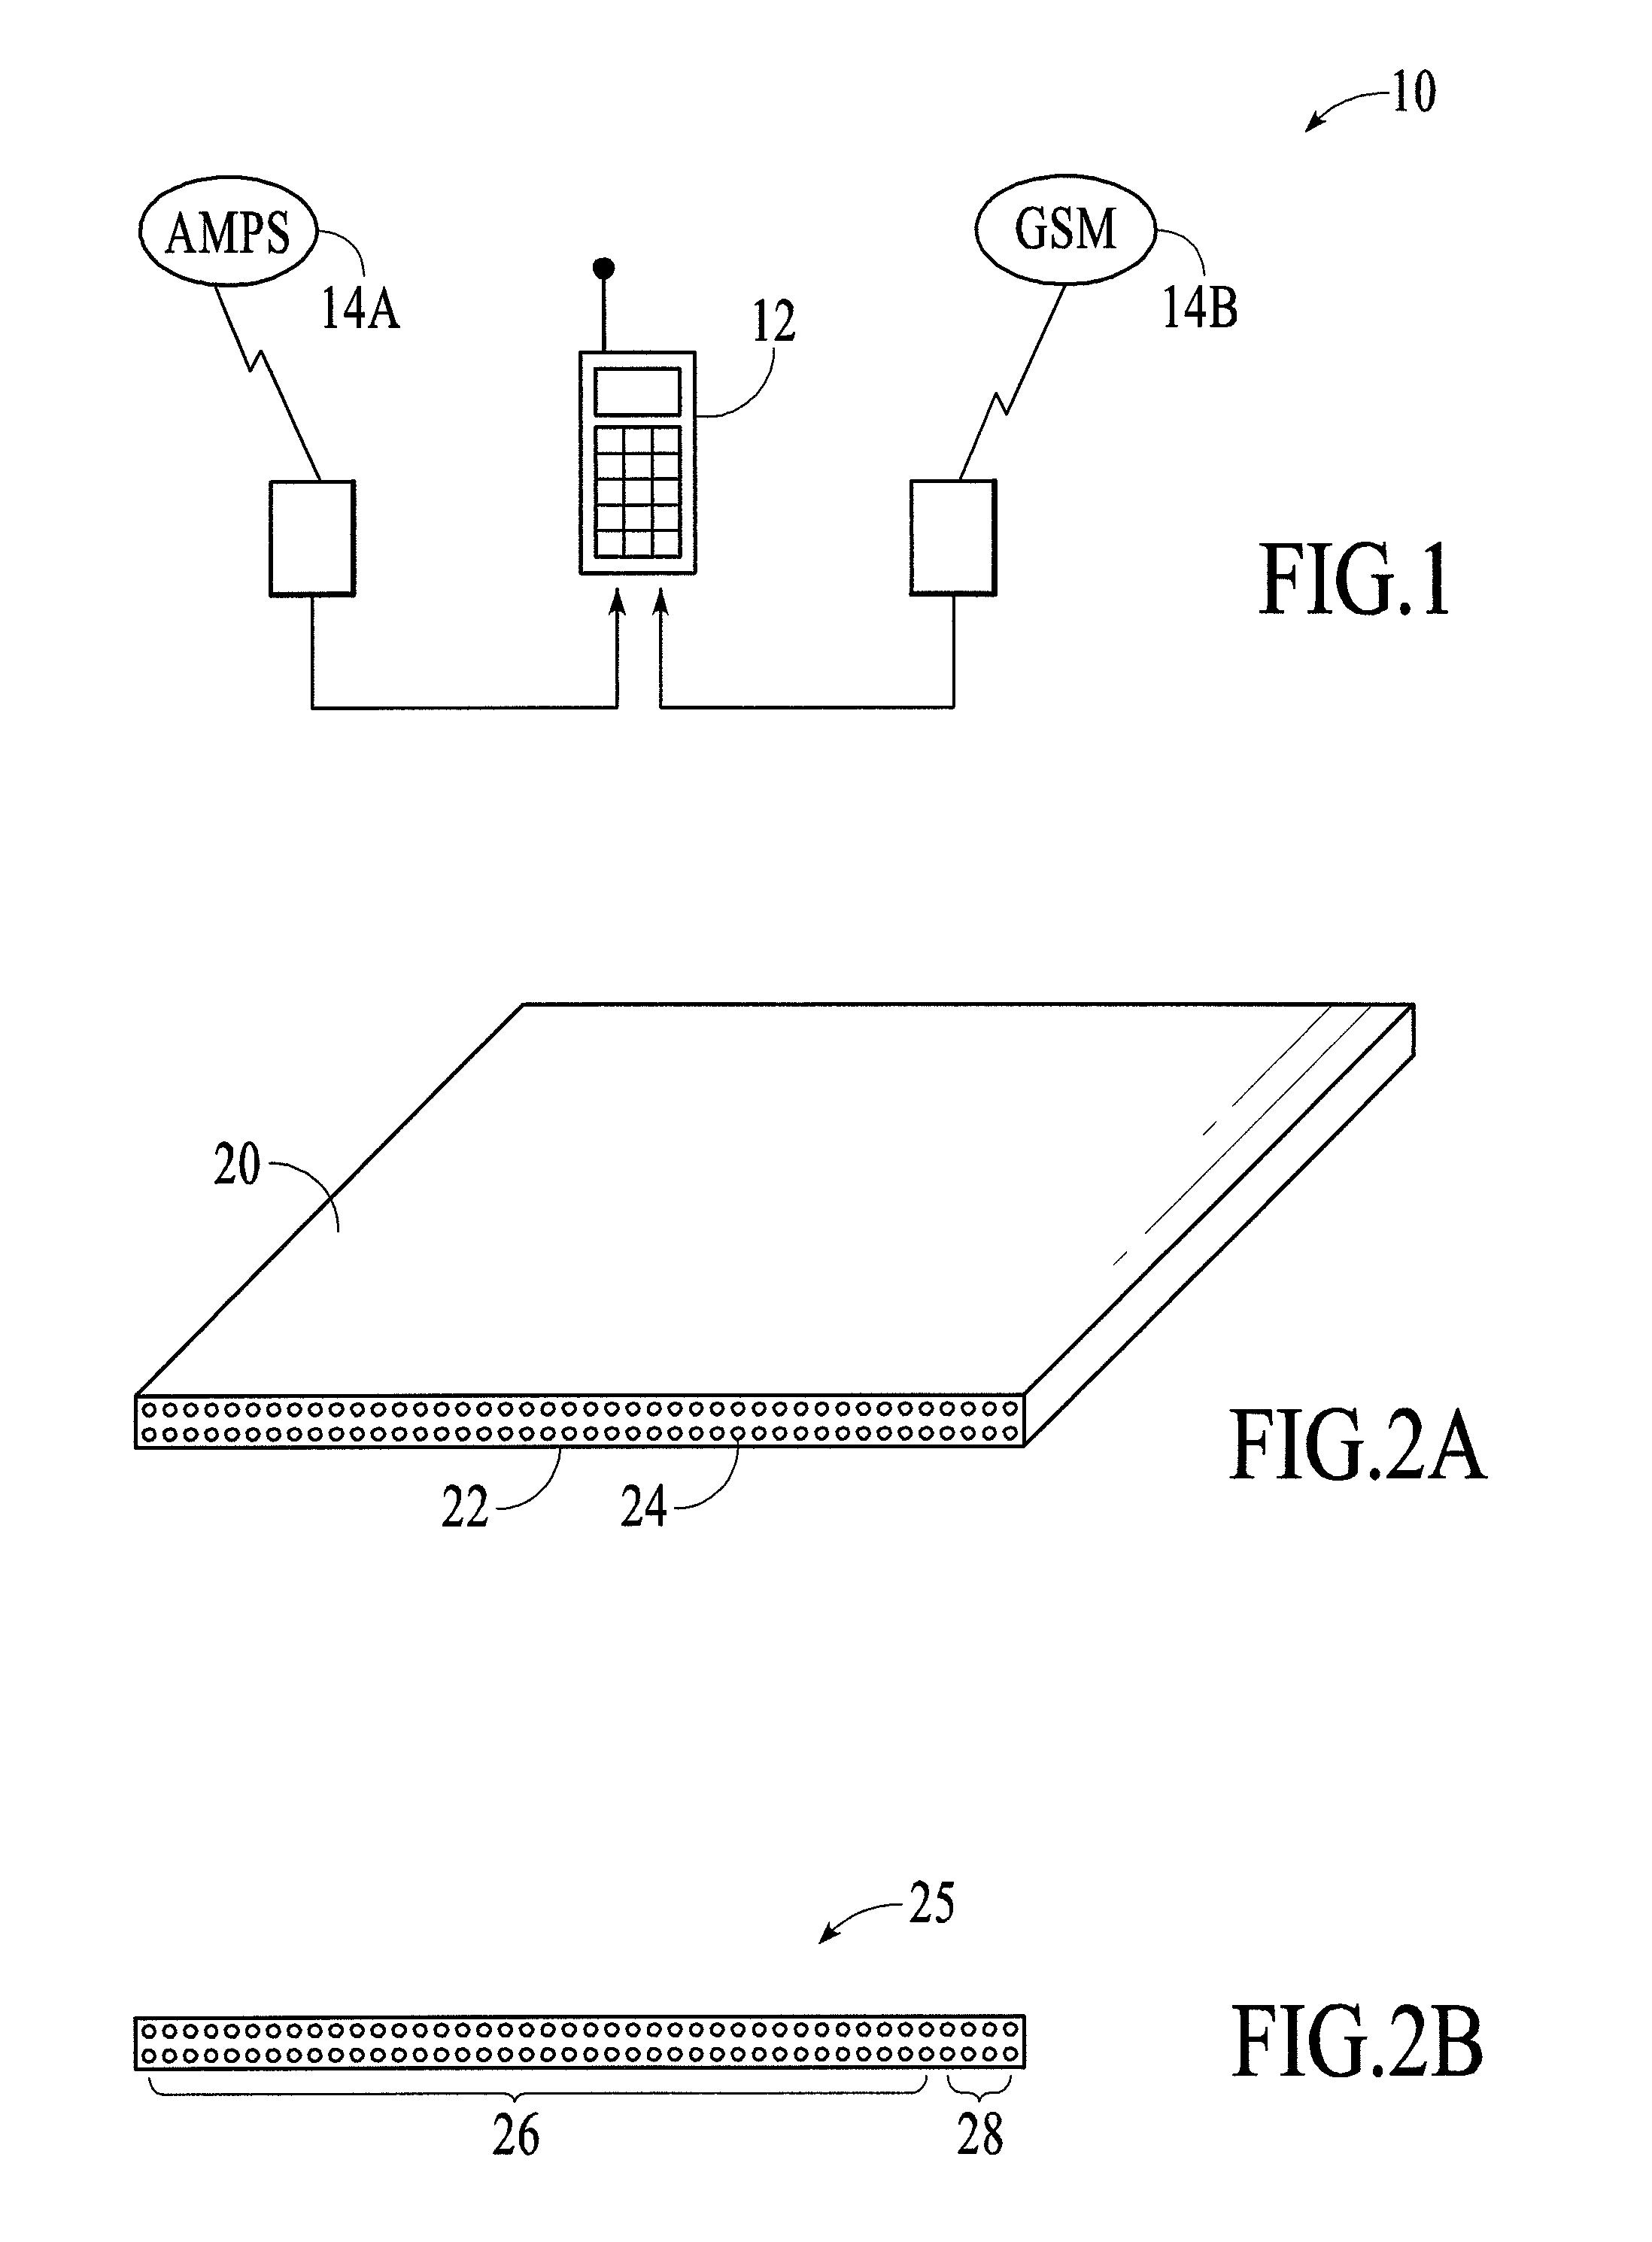 Methods and Apparatus for a Flexible Wireless Communication and Cellular Telephone System